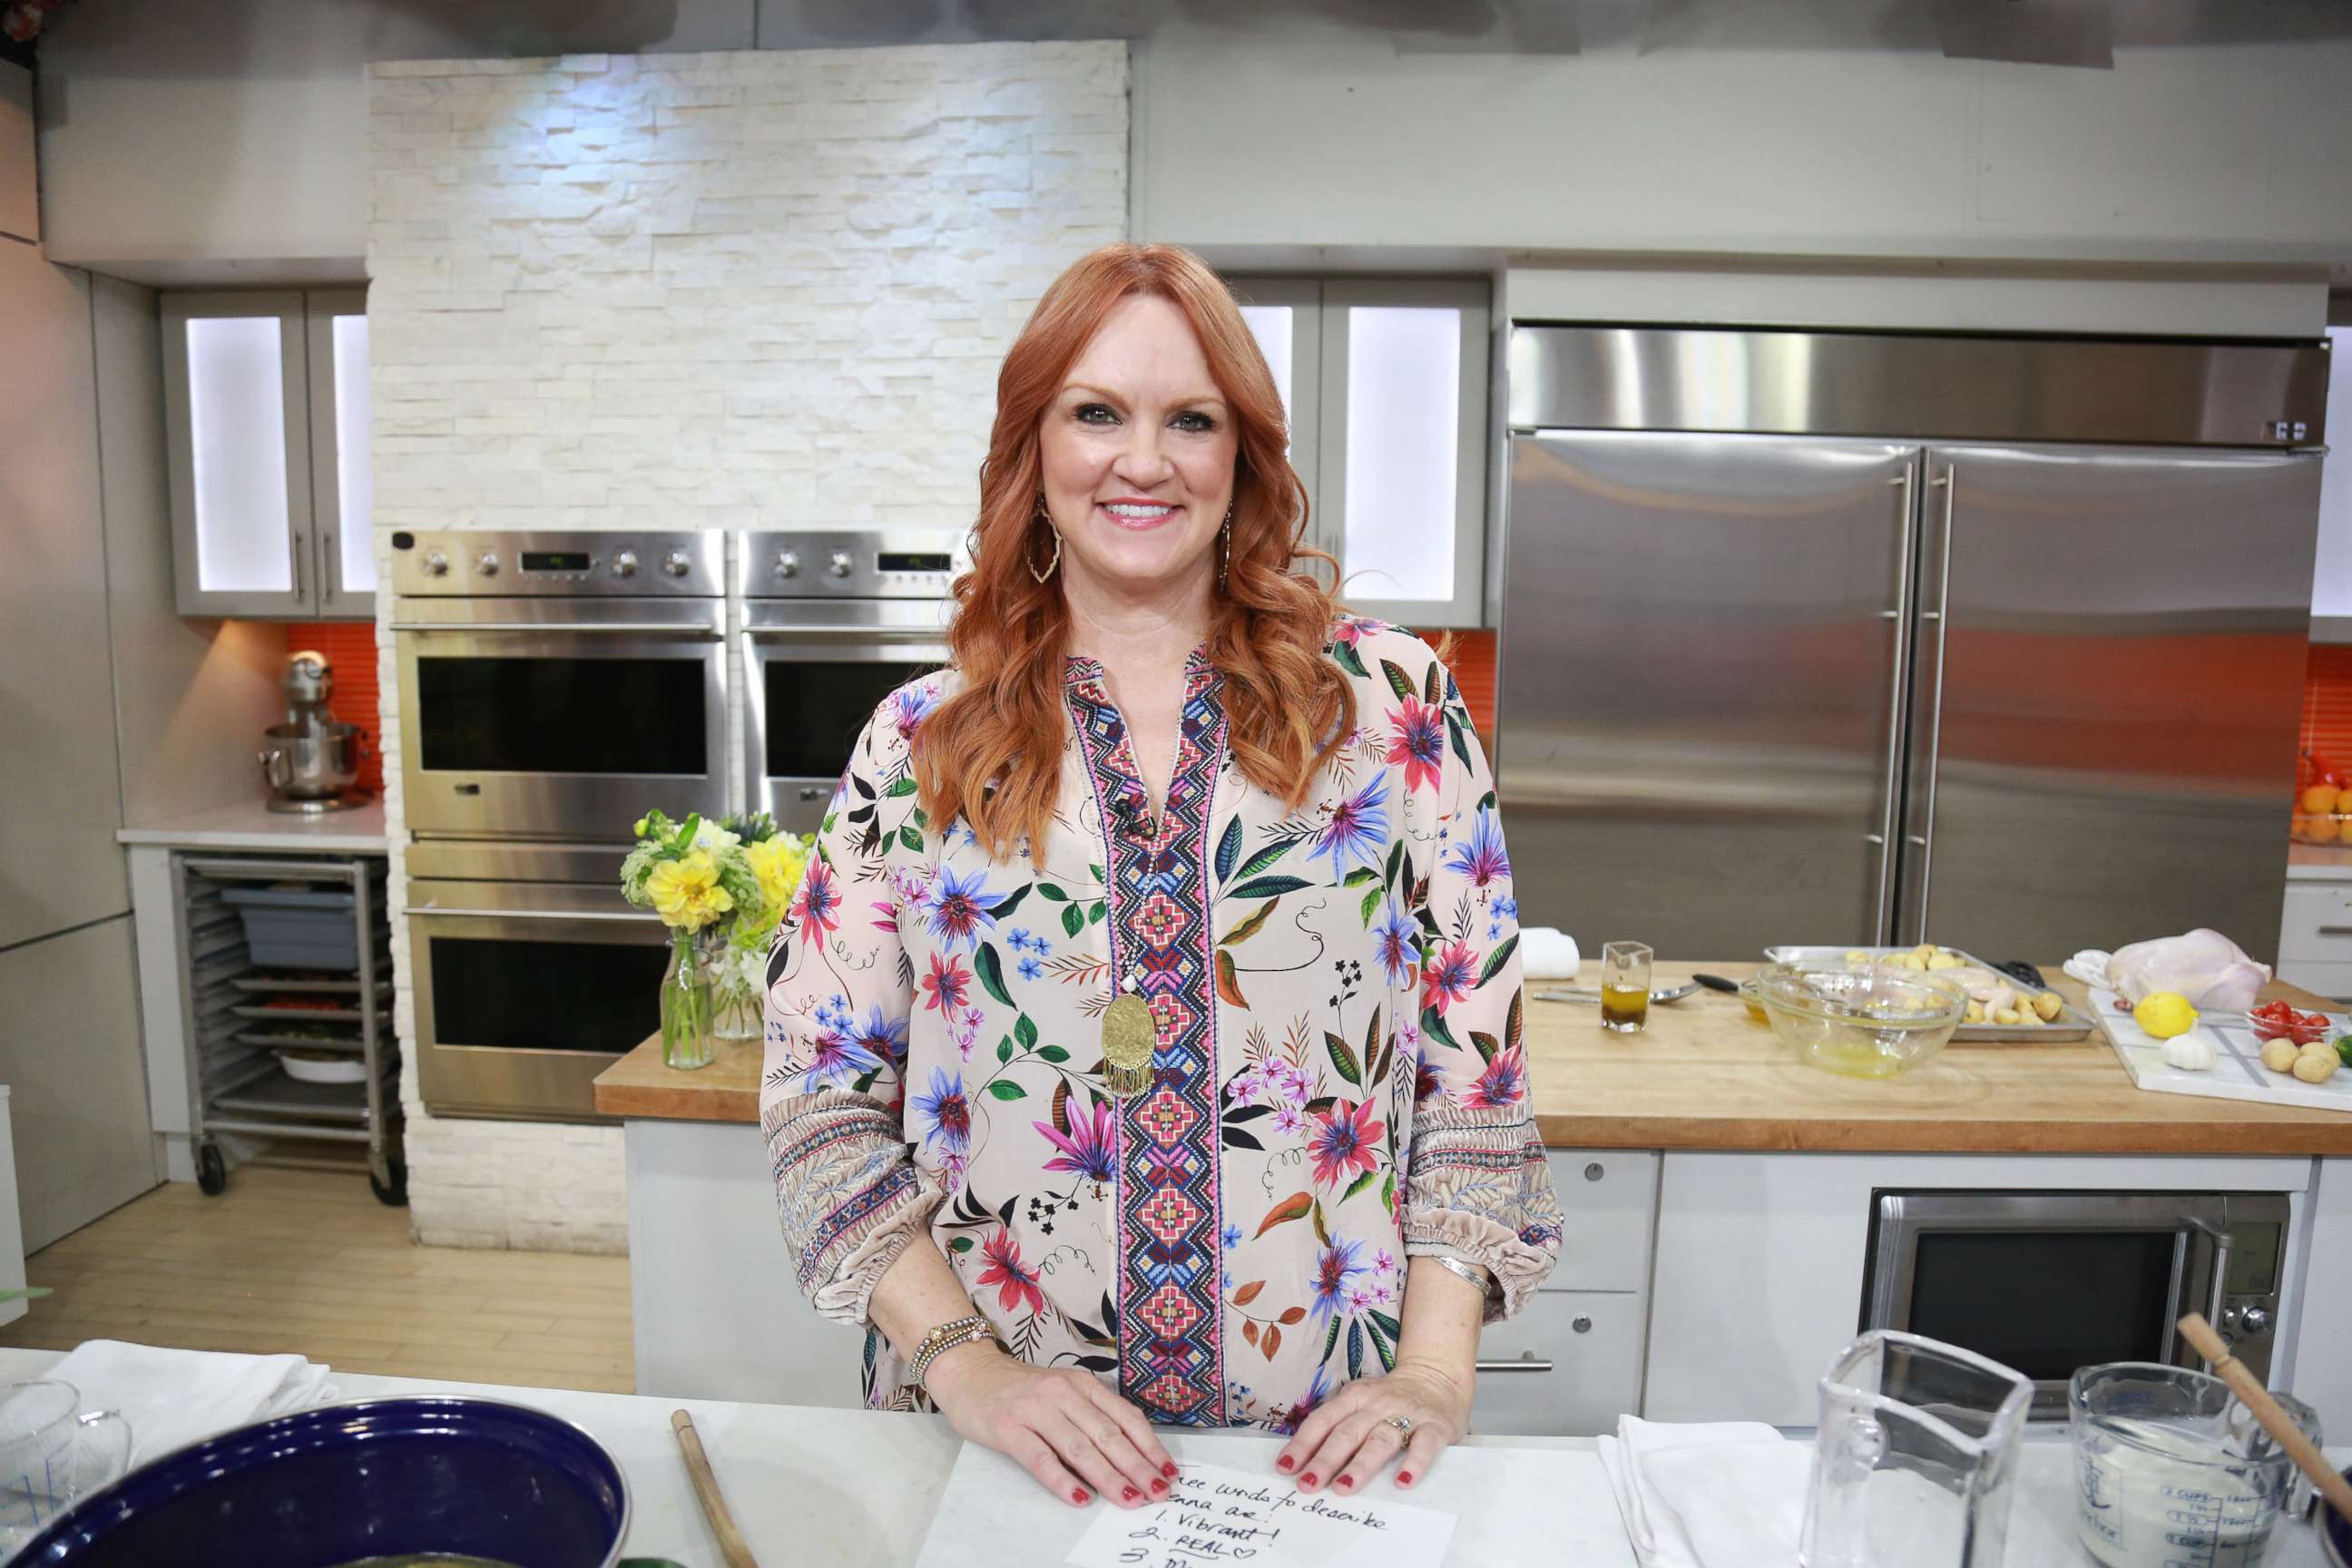 The Pioneer Woman' Ree Drummond stars in 1st Food Network holiday movie -  ABC News